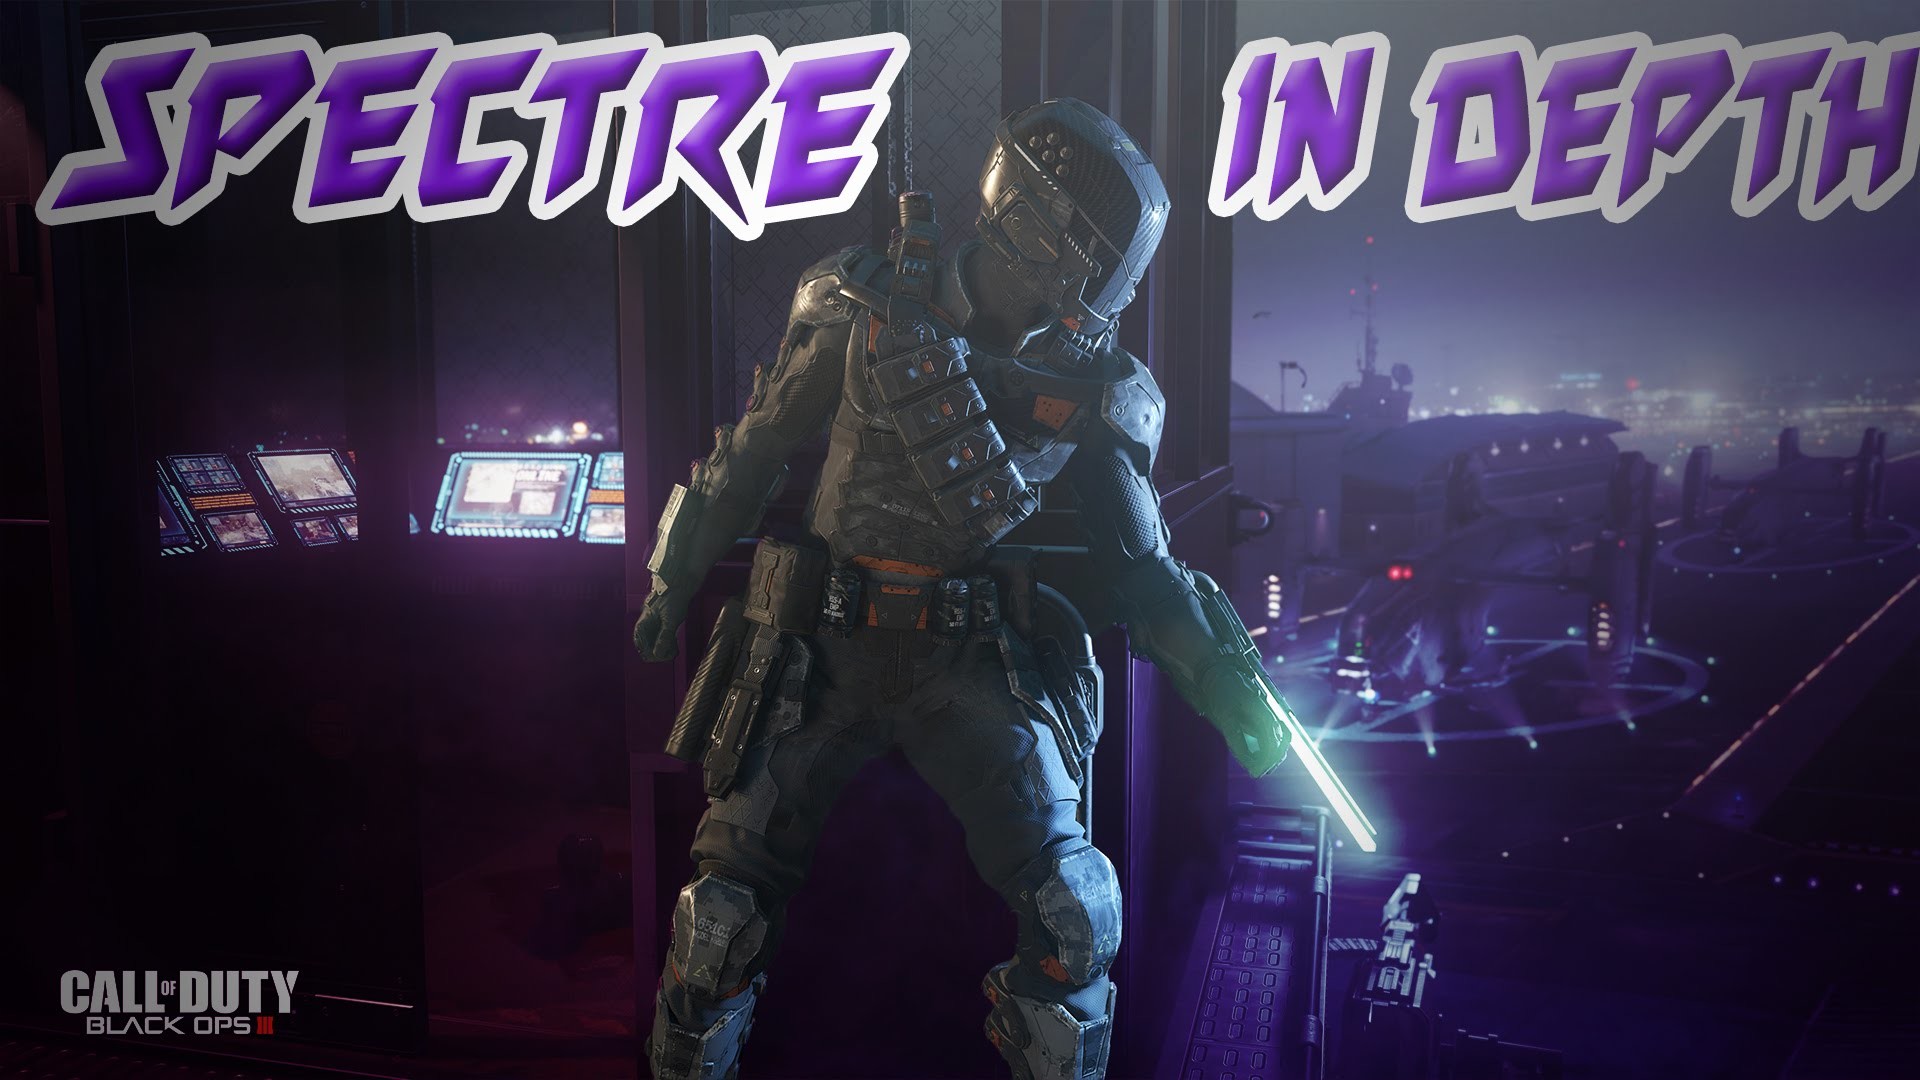 Black Ops 3 SPECTRE Gameplay! "The Ripper" Blade + Active Camo  (Invisibility)